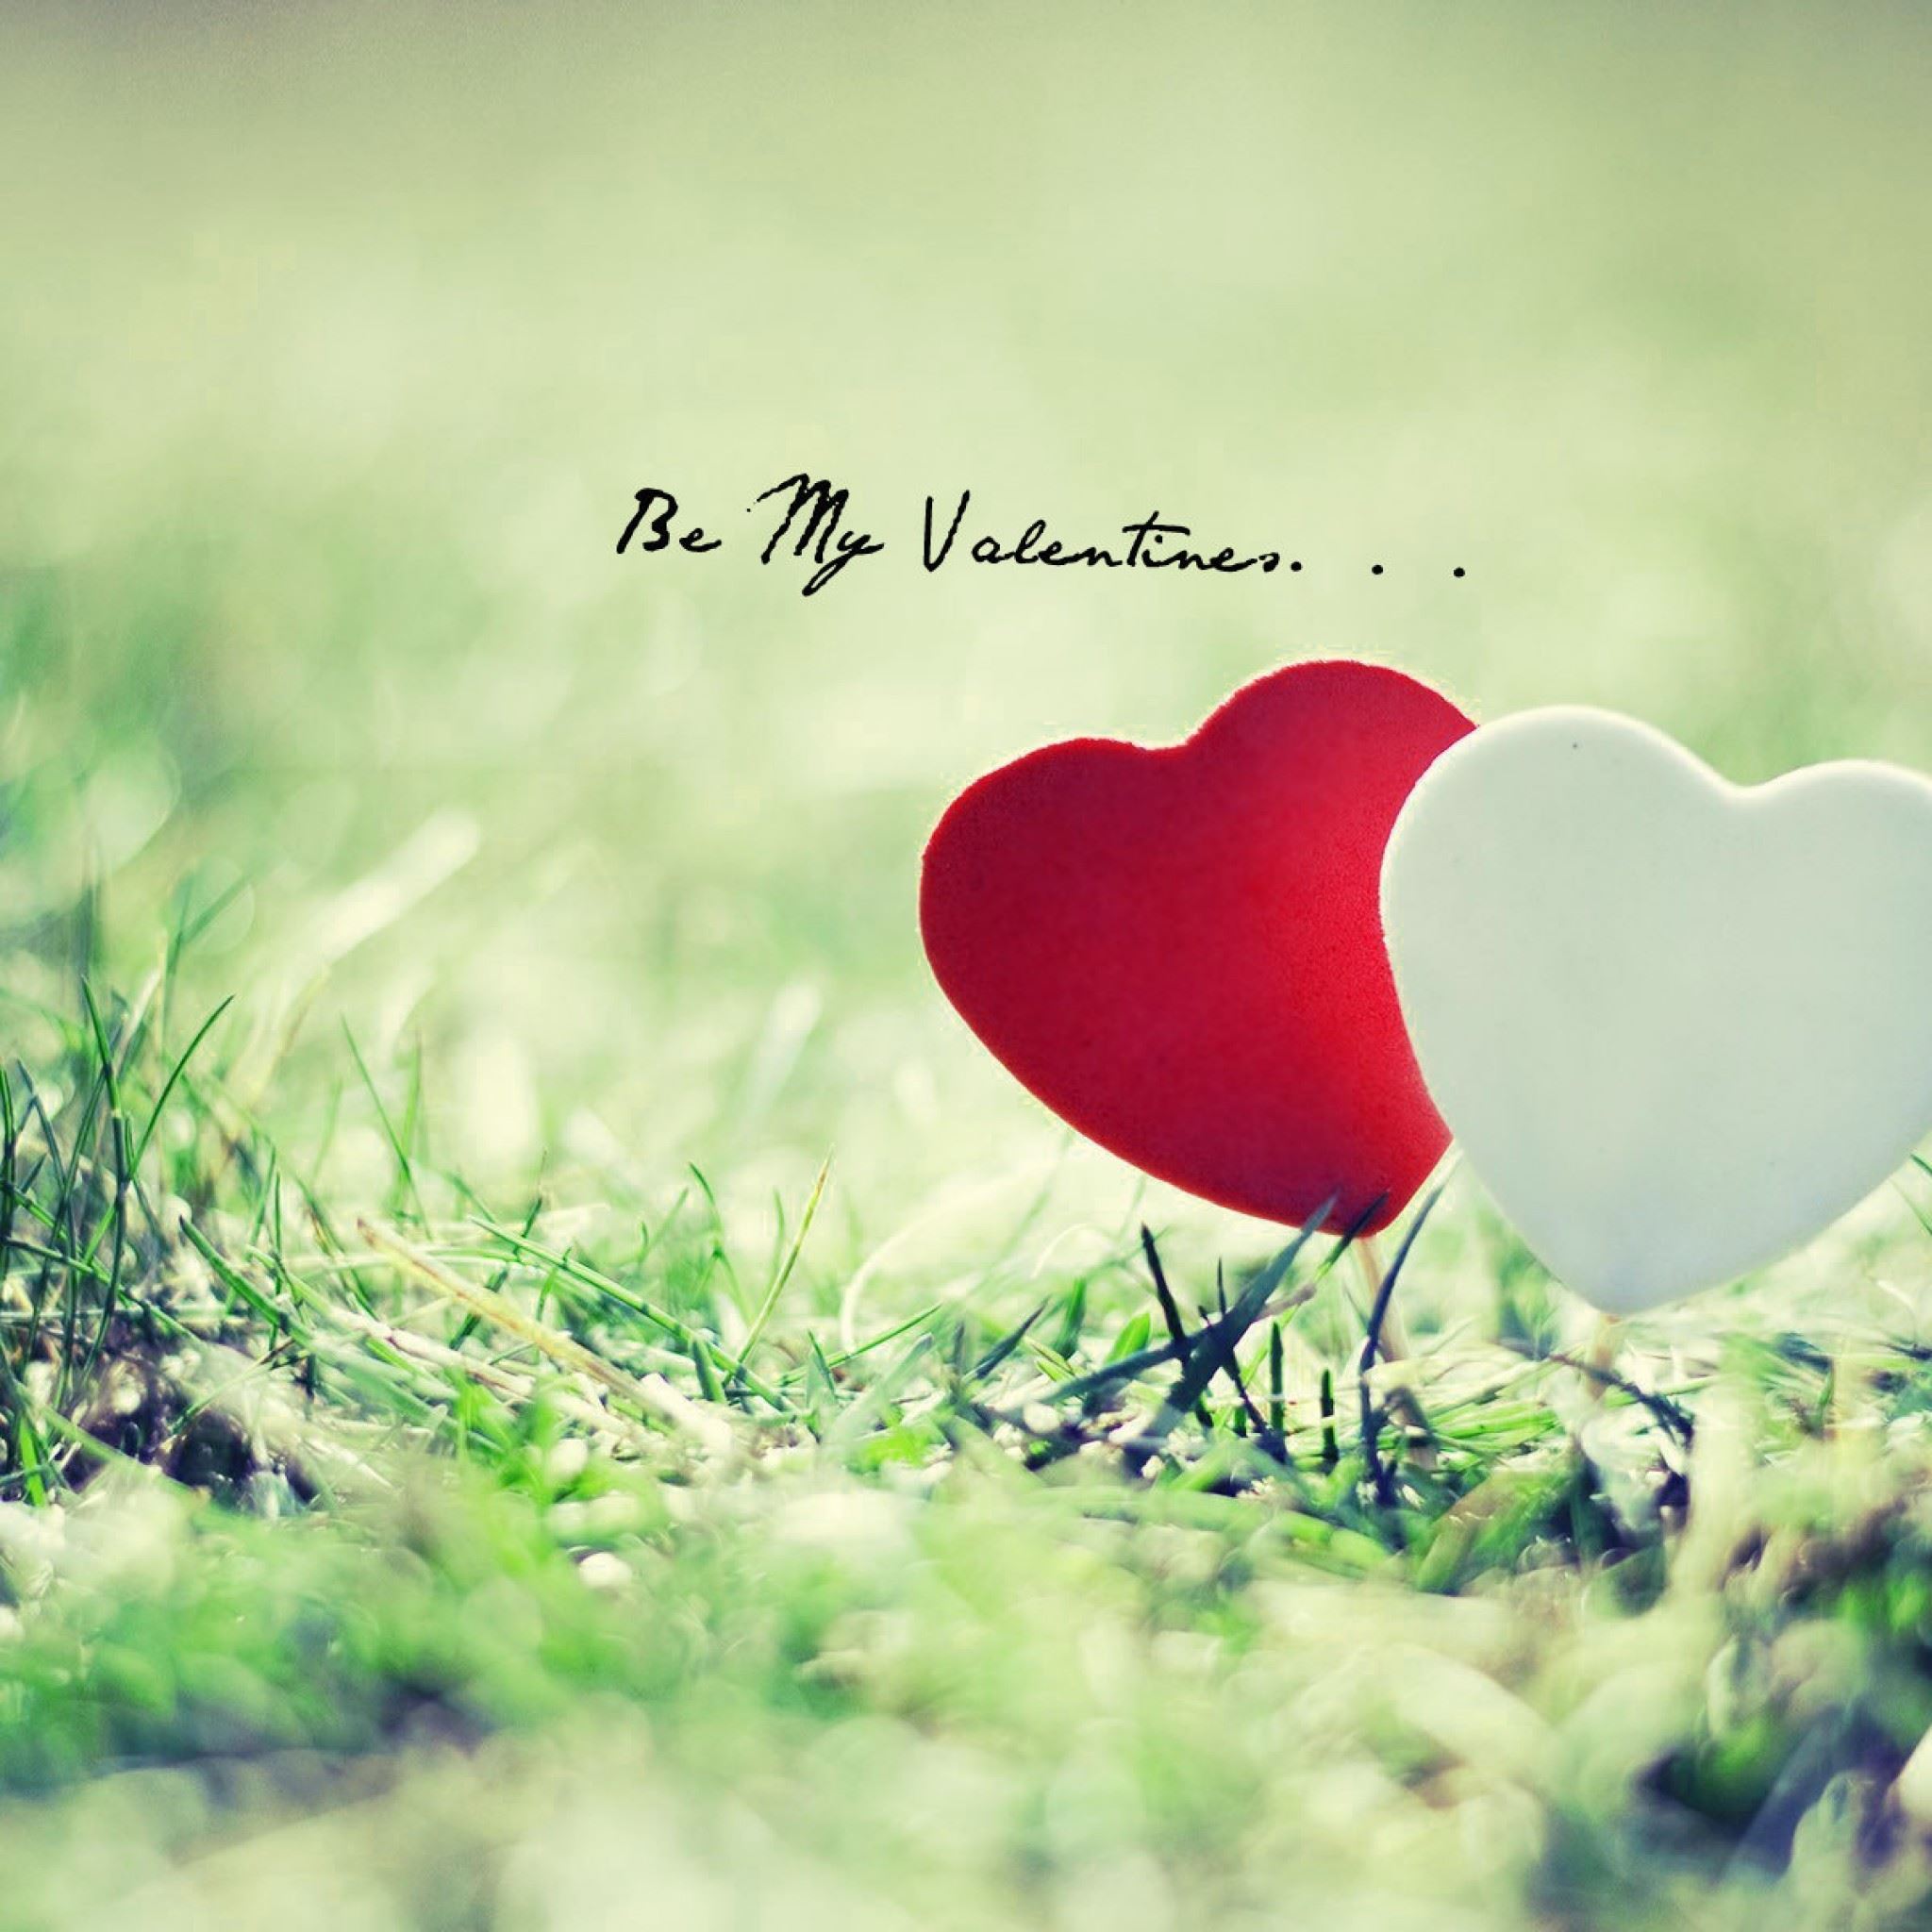 Be My Valentine Hearts Grass Ipad Air Wallpapers Free Download